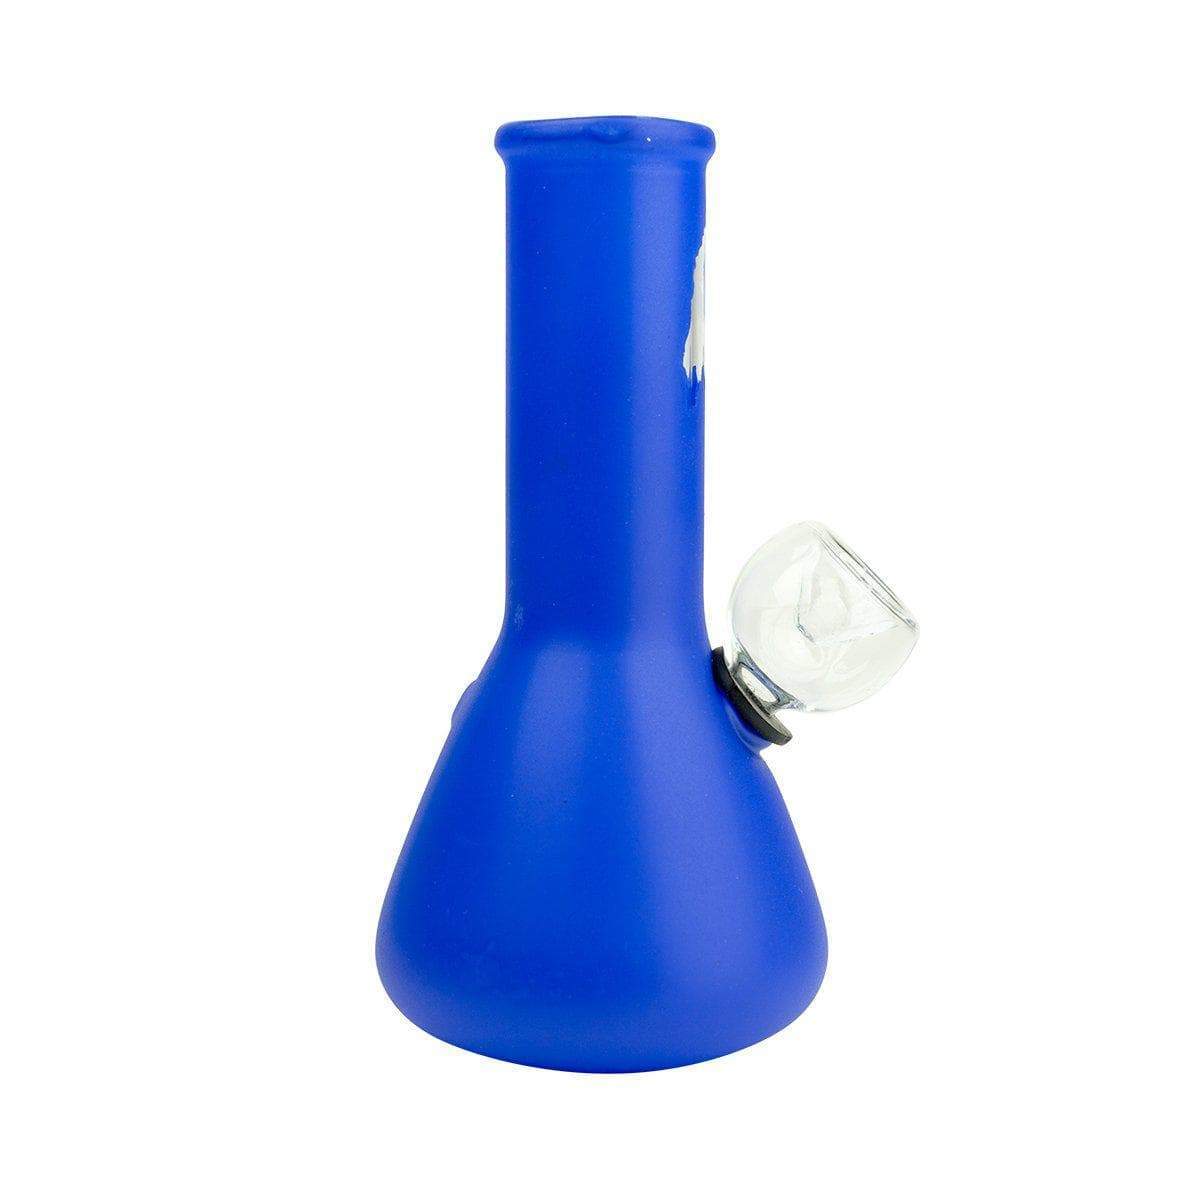 5-inch blue glass carb bong smoking device bright solid color Bob Marley face sillhouette printed on neck